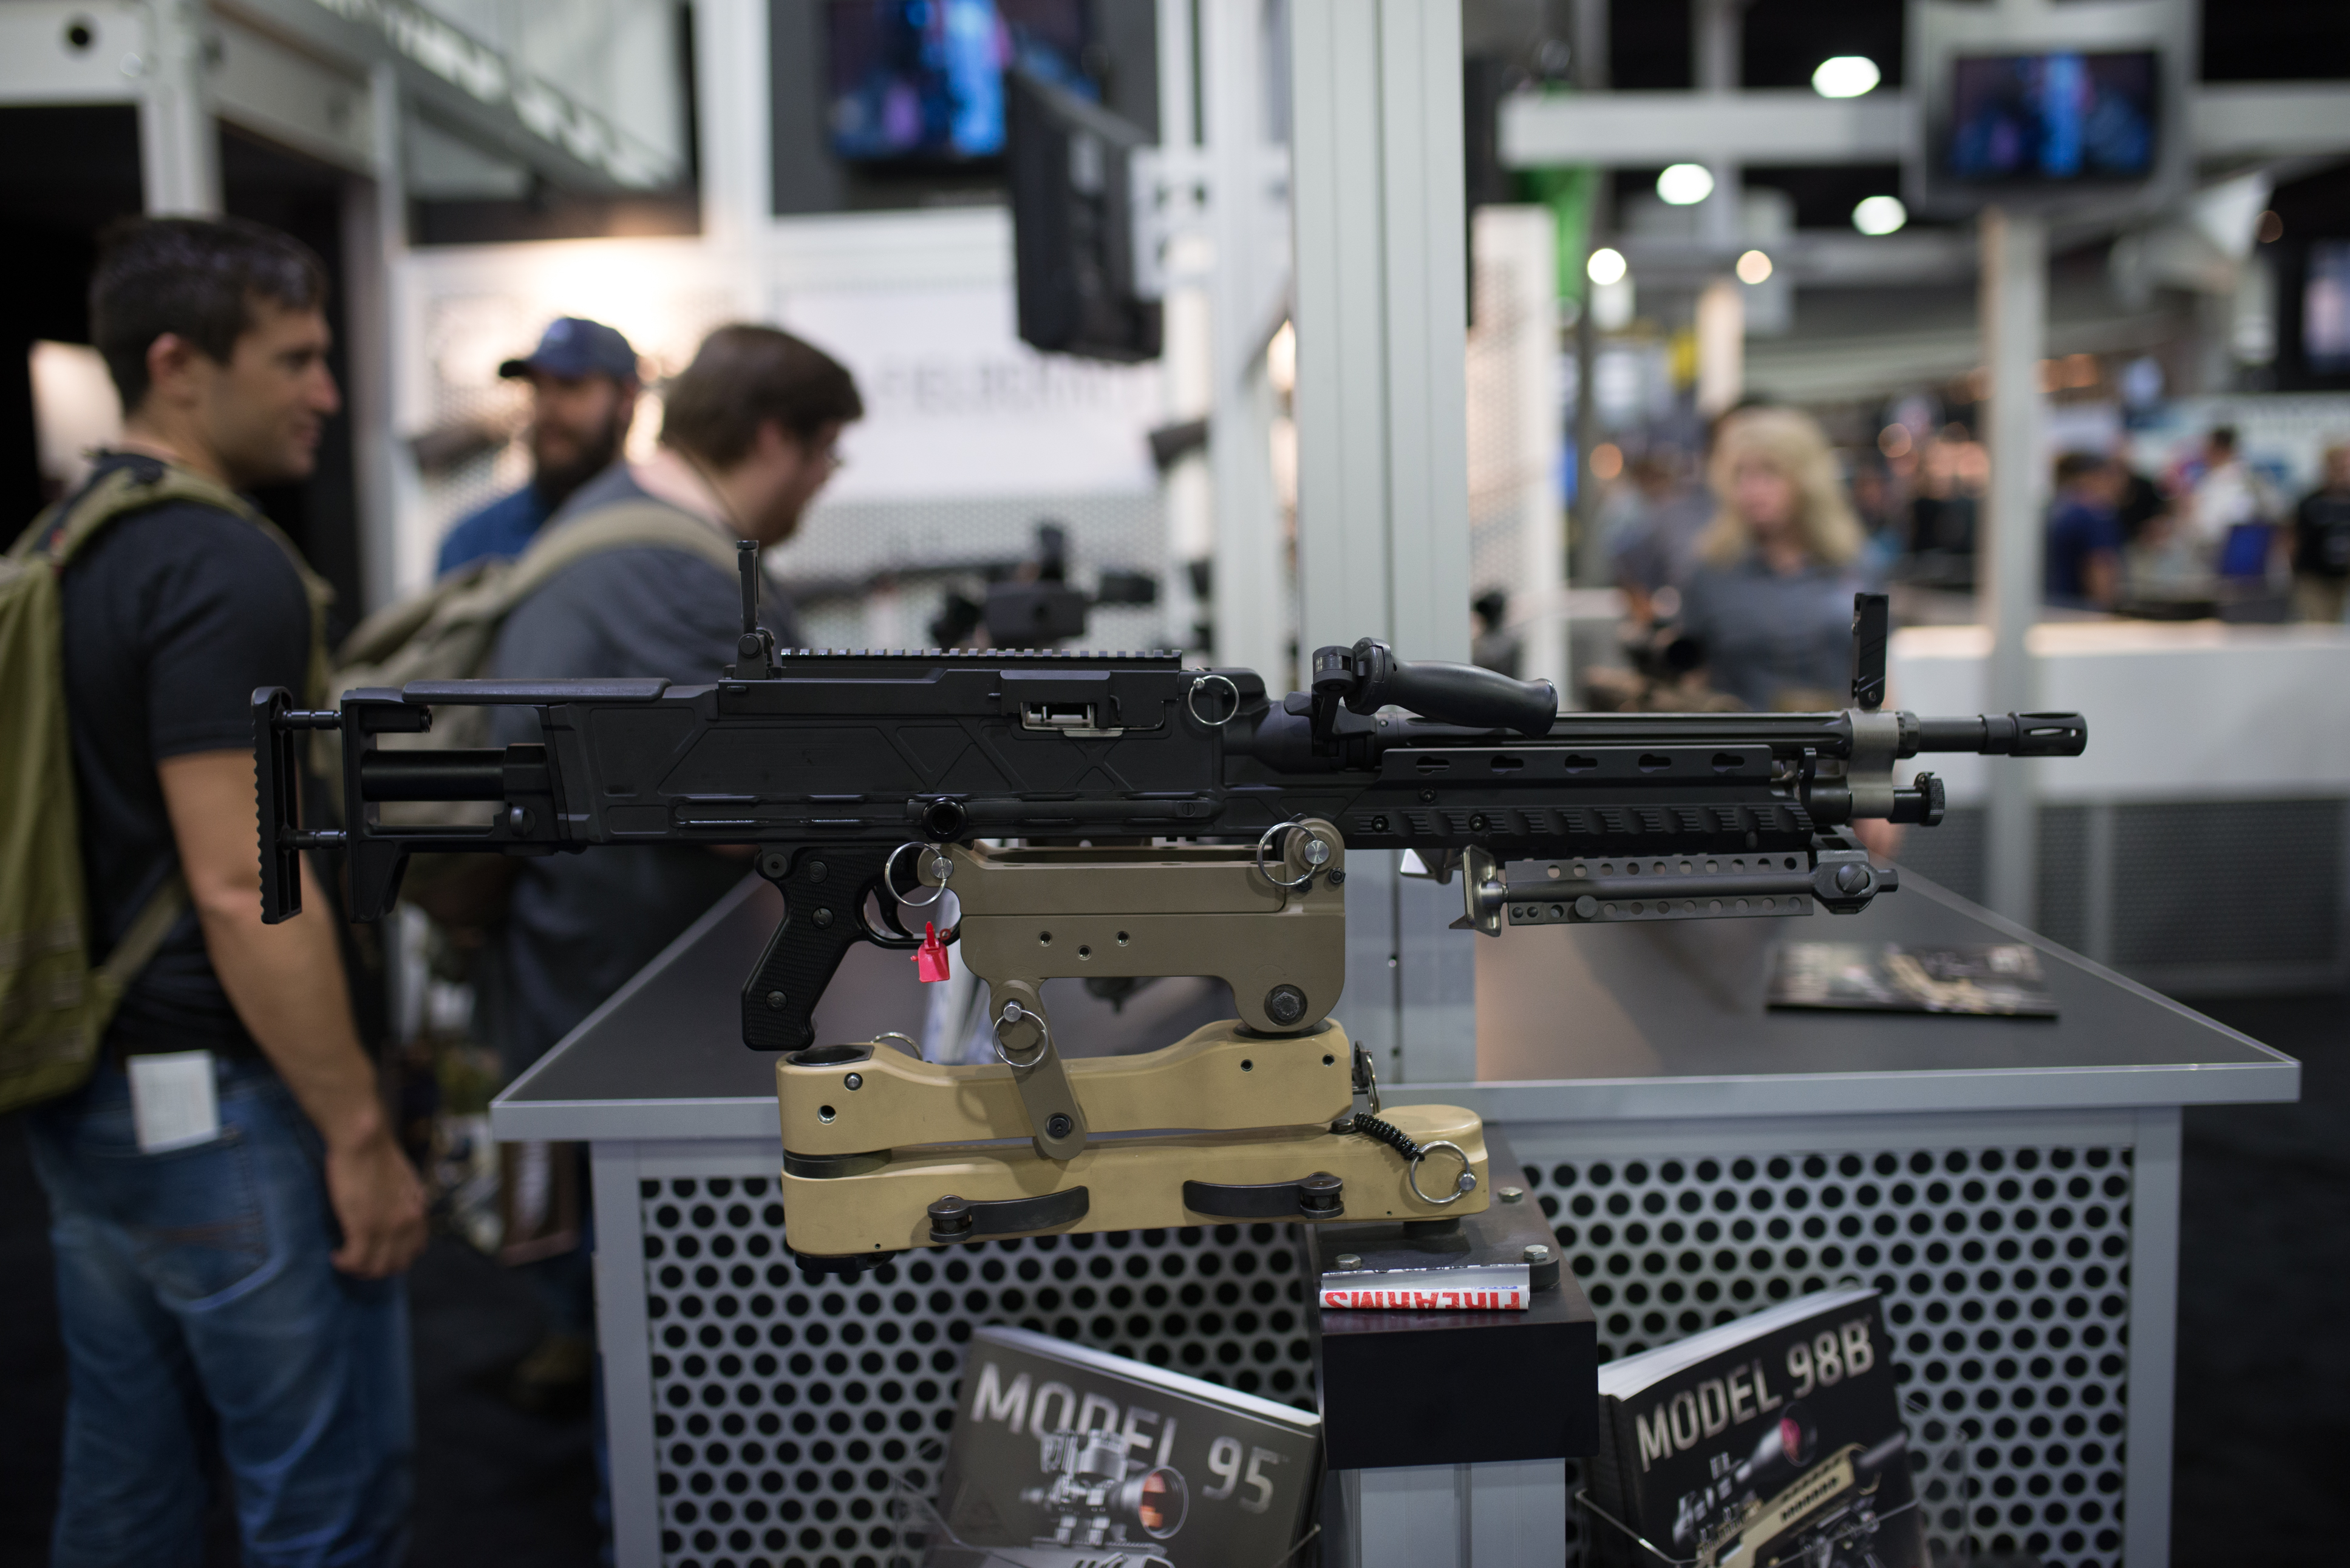 National Rifle Association members visit exhibitor booths at the 146th NRA Annual Meetings &amp; Exhibits on April 28, 2017. (NurPhoto&mdash;NurPhoto via Getty Images)